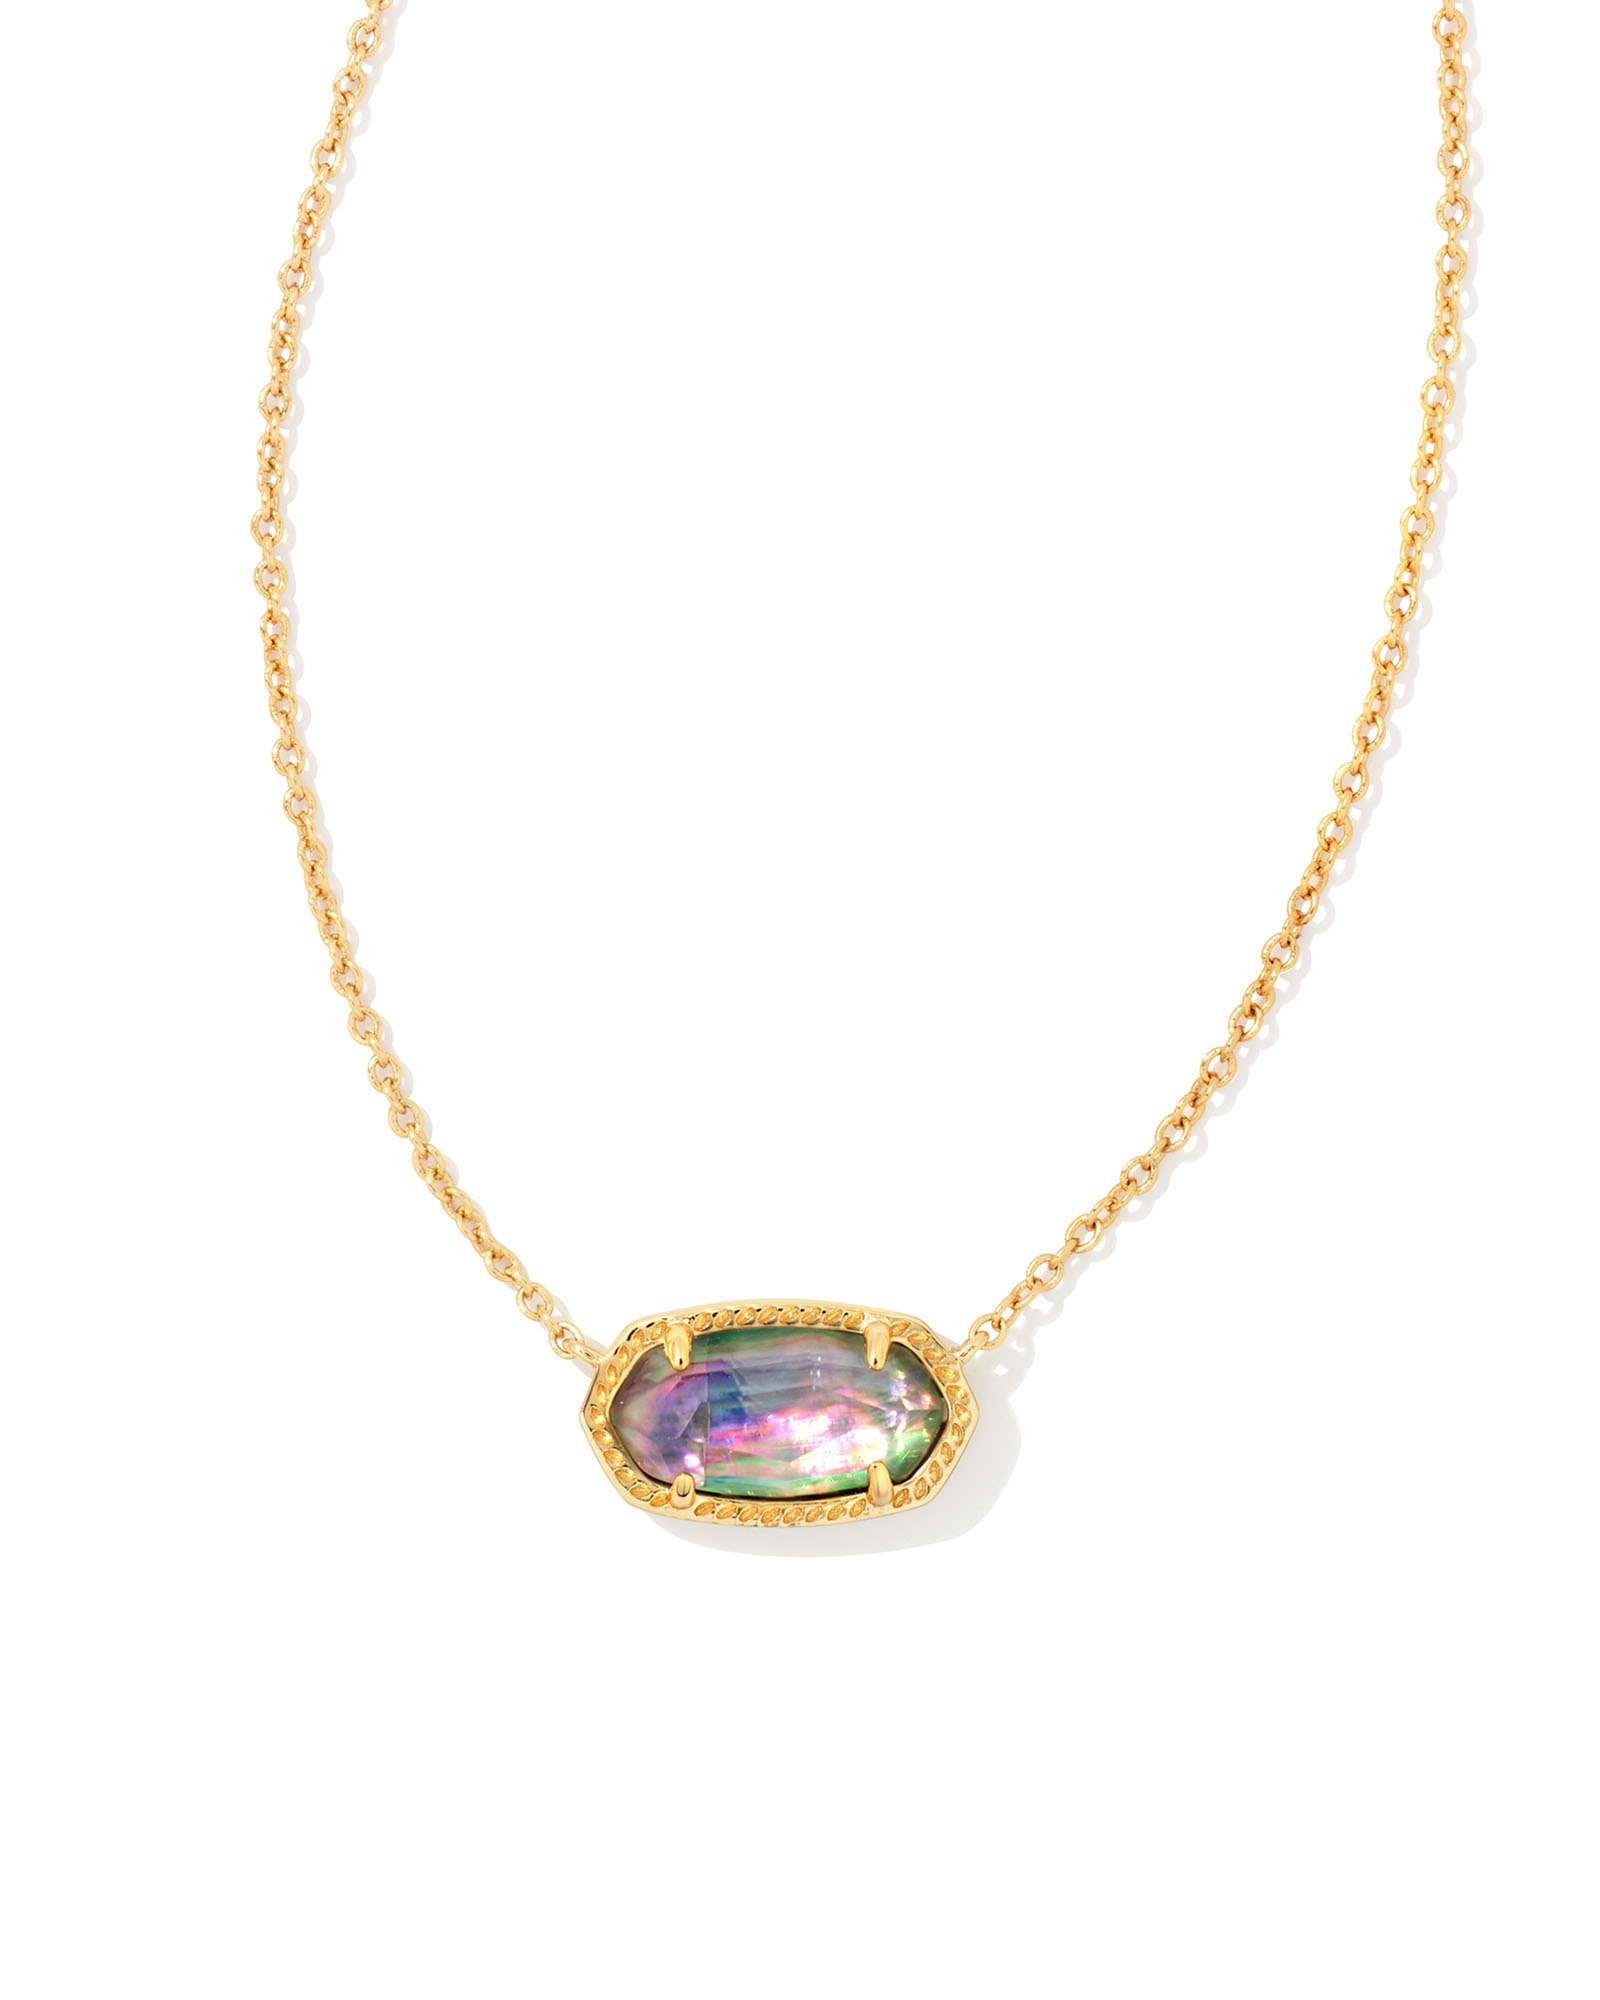 Elisa Gold Pendant Necklace in Lilac Abalone | Kendra Scott